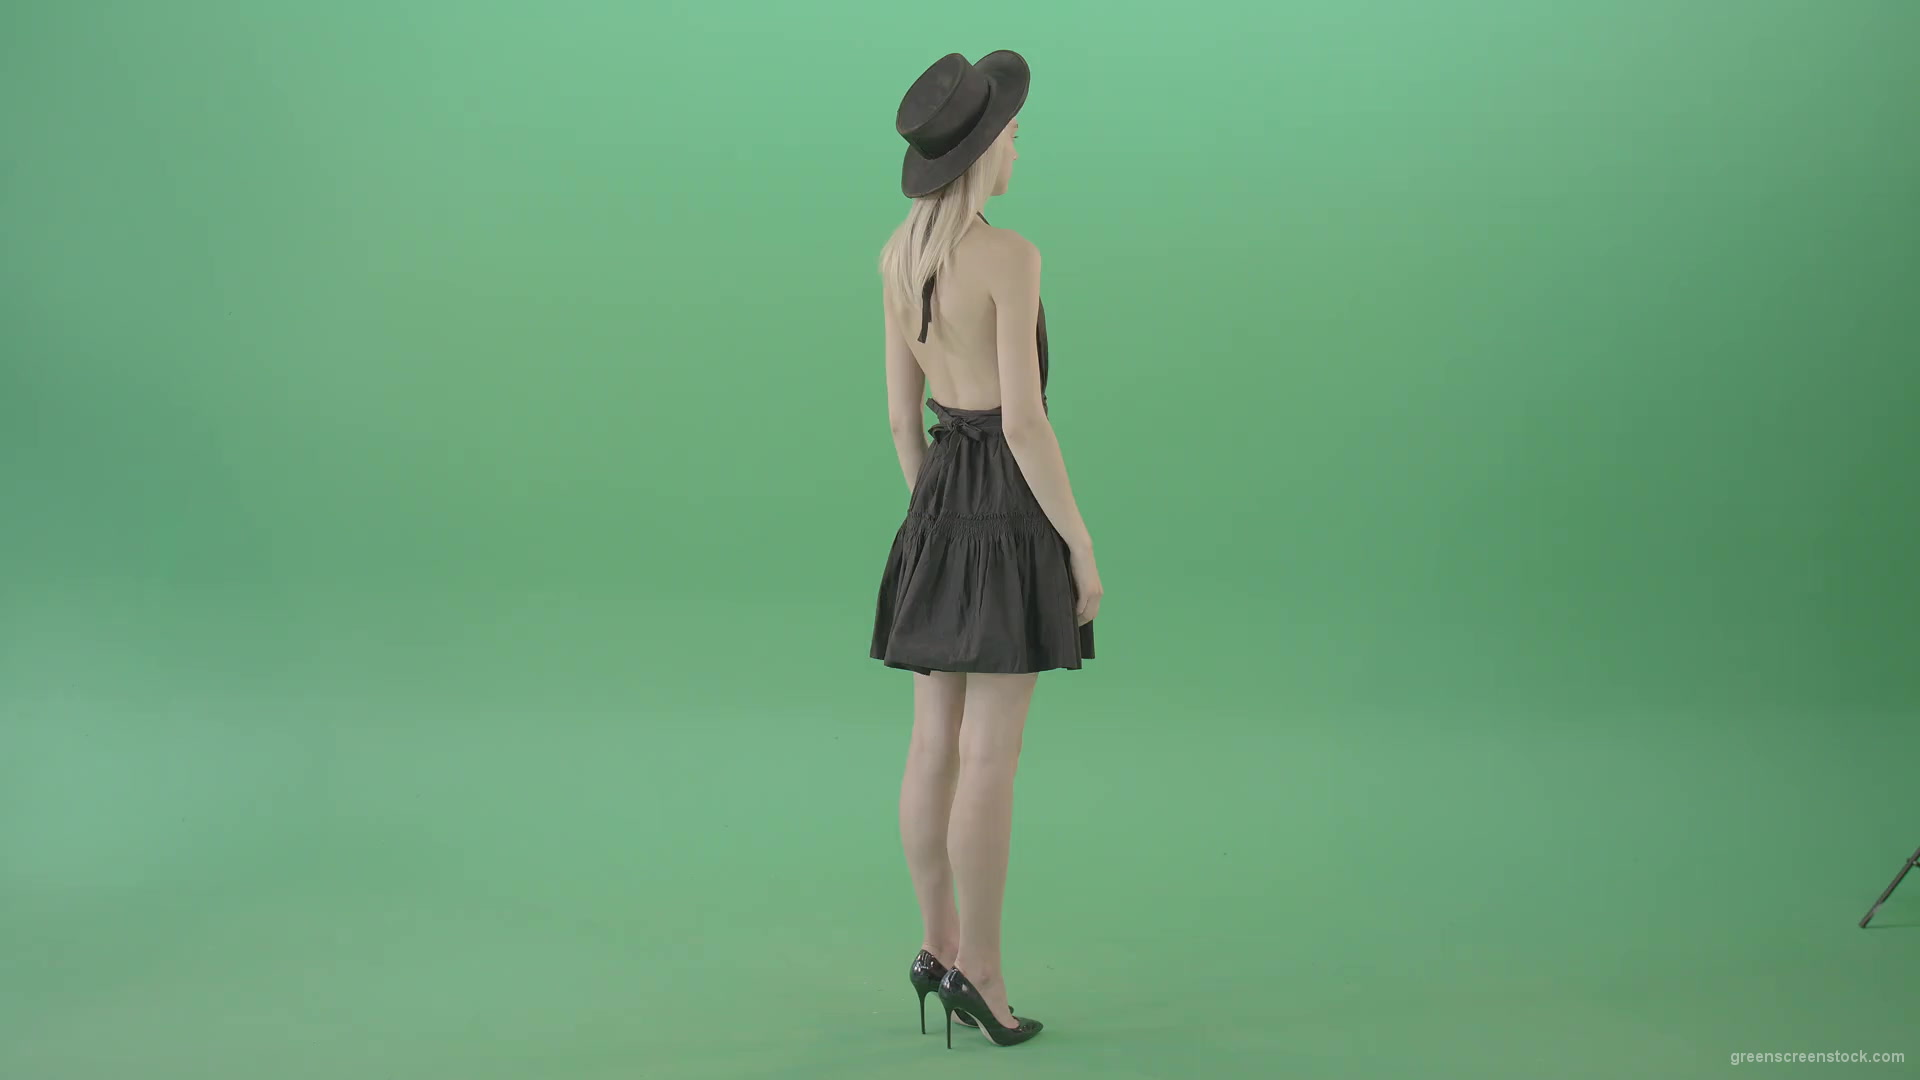 Full-size-fashion-girl-looking-virtual-products-on-touch-green-screen-4K-Video-Footage-1920_001 Green Screen Stock